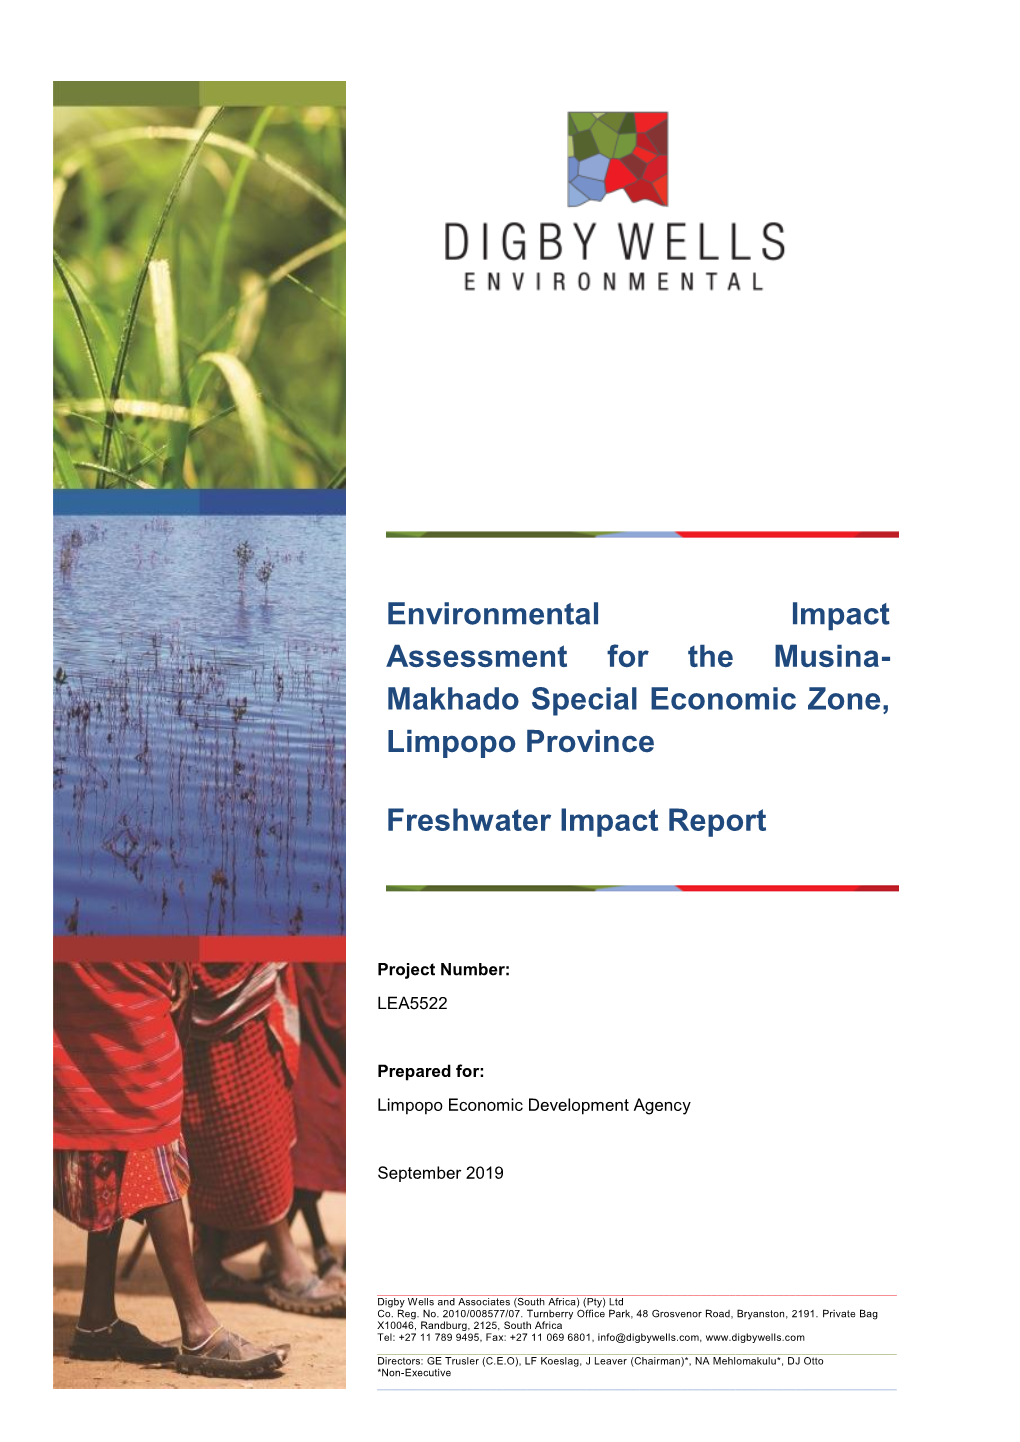 Environmental Impact Assessment for the Musina- Makhado Special Economic Zone, Limpopo Province